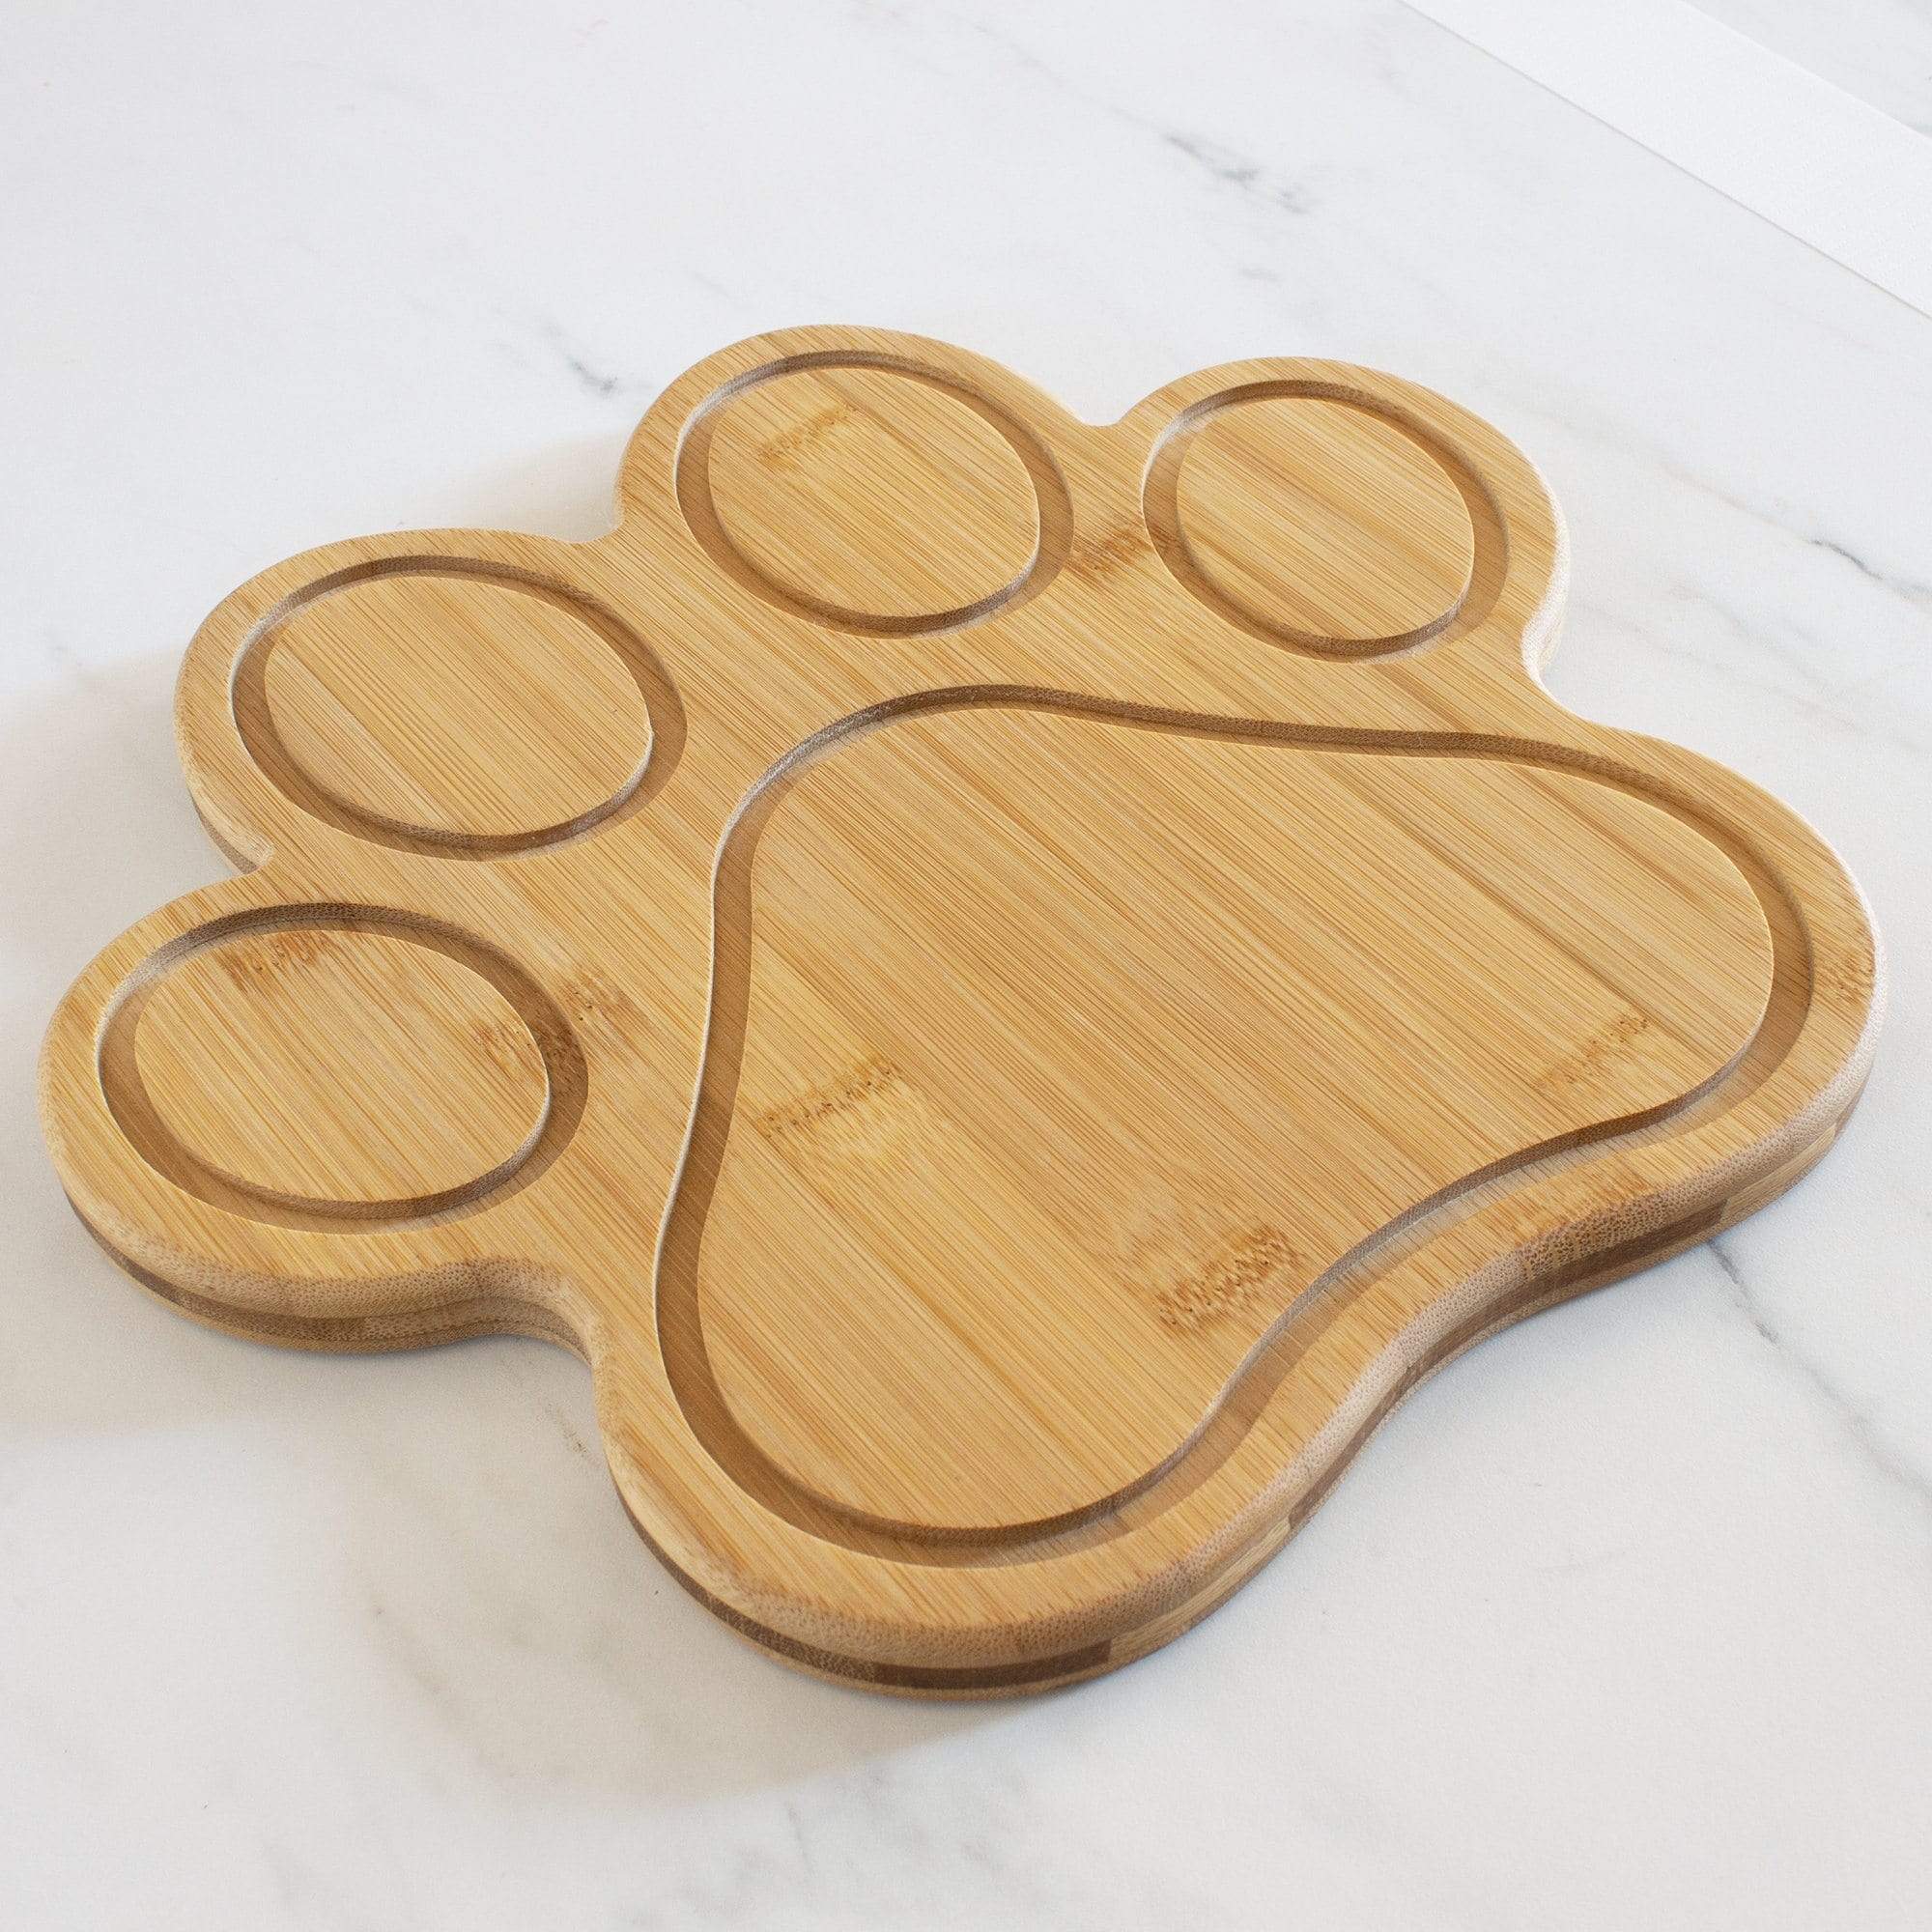 Totally Bamboo Paw Shaped Bamboo Serving and Cutting Board, 11 x 10